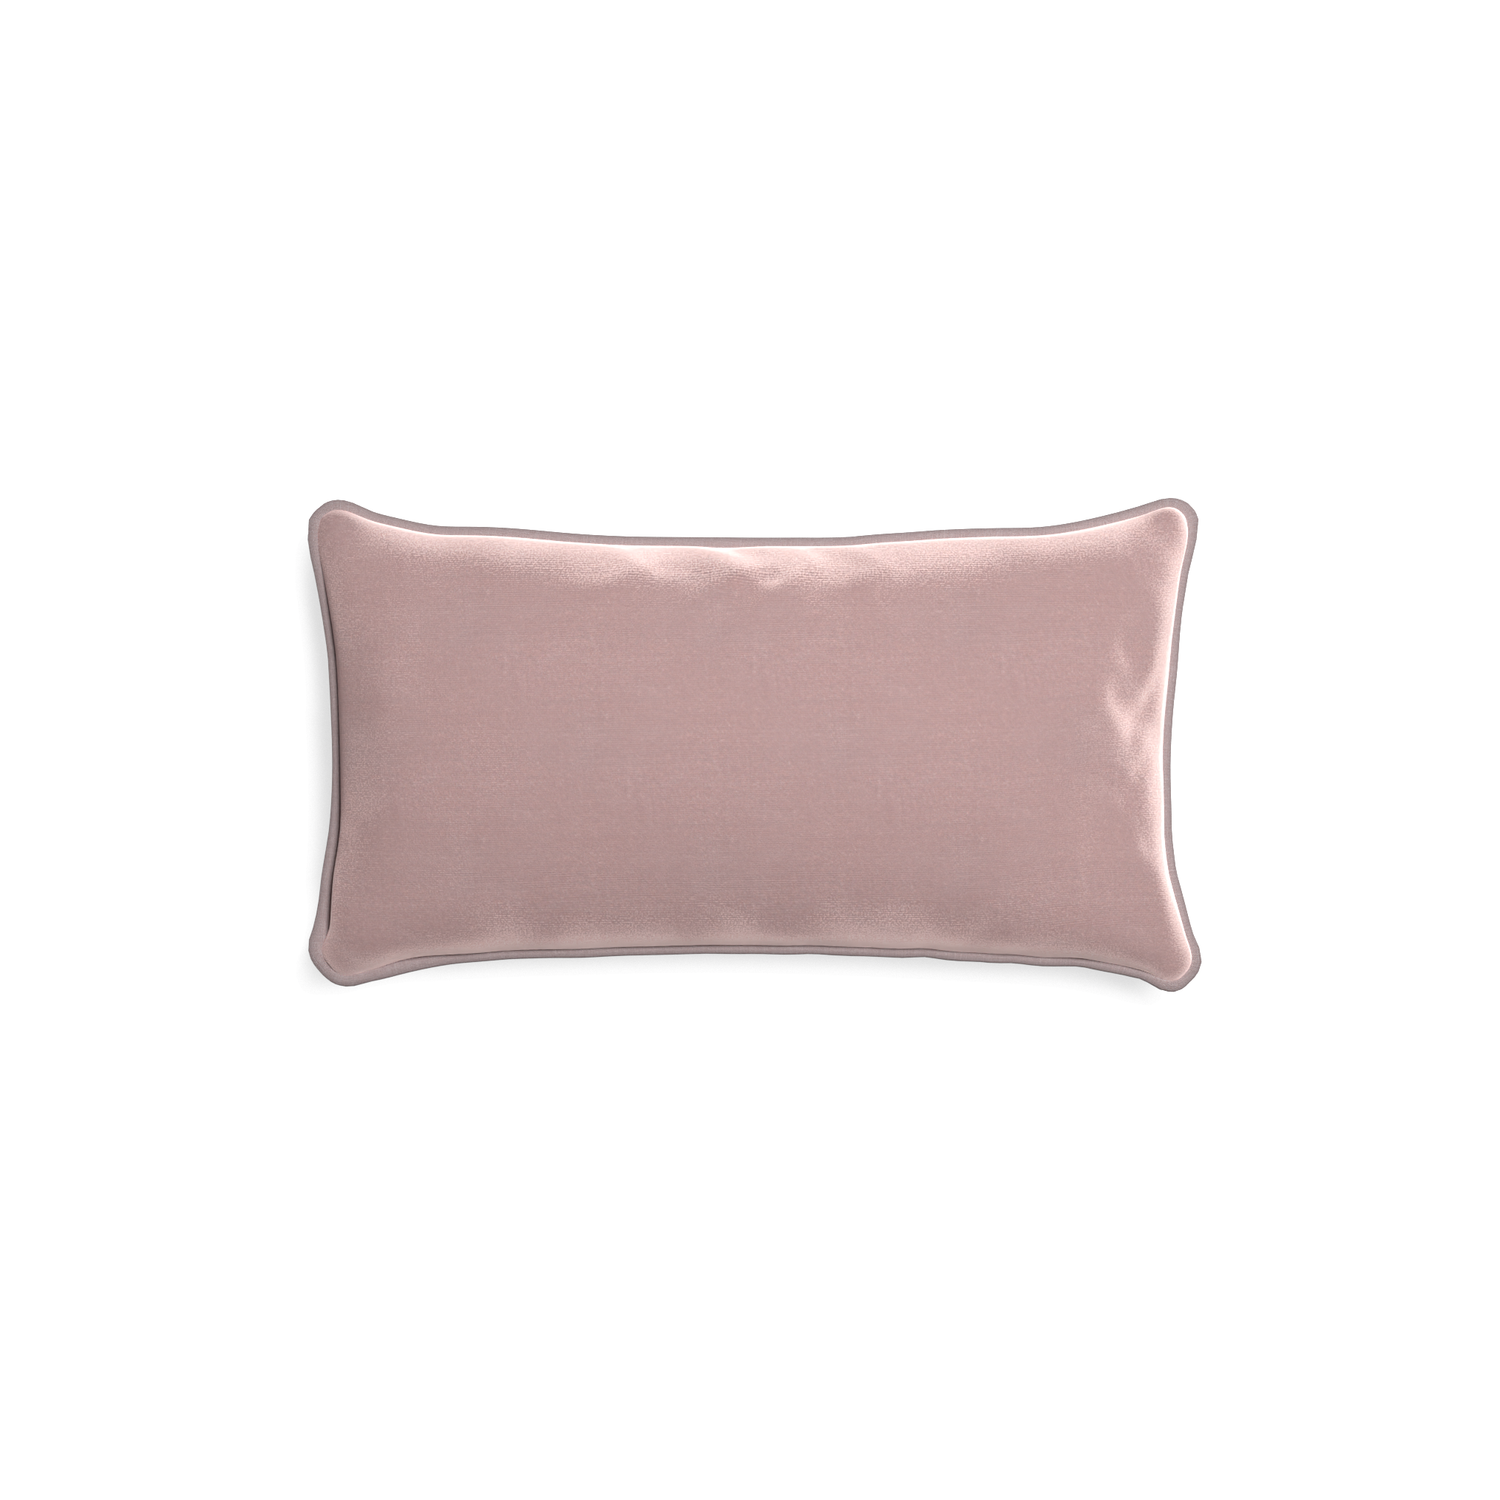 Petite-lumbar mauve velvet custom mauvepillow with orchid piping on white background